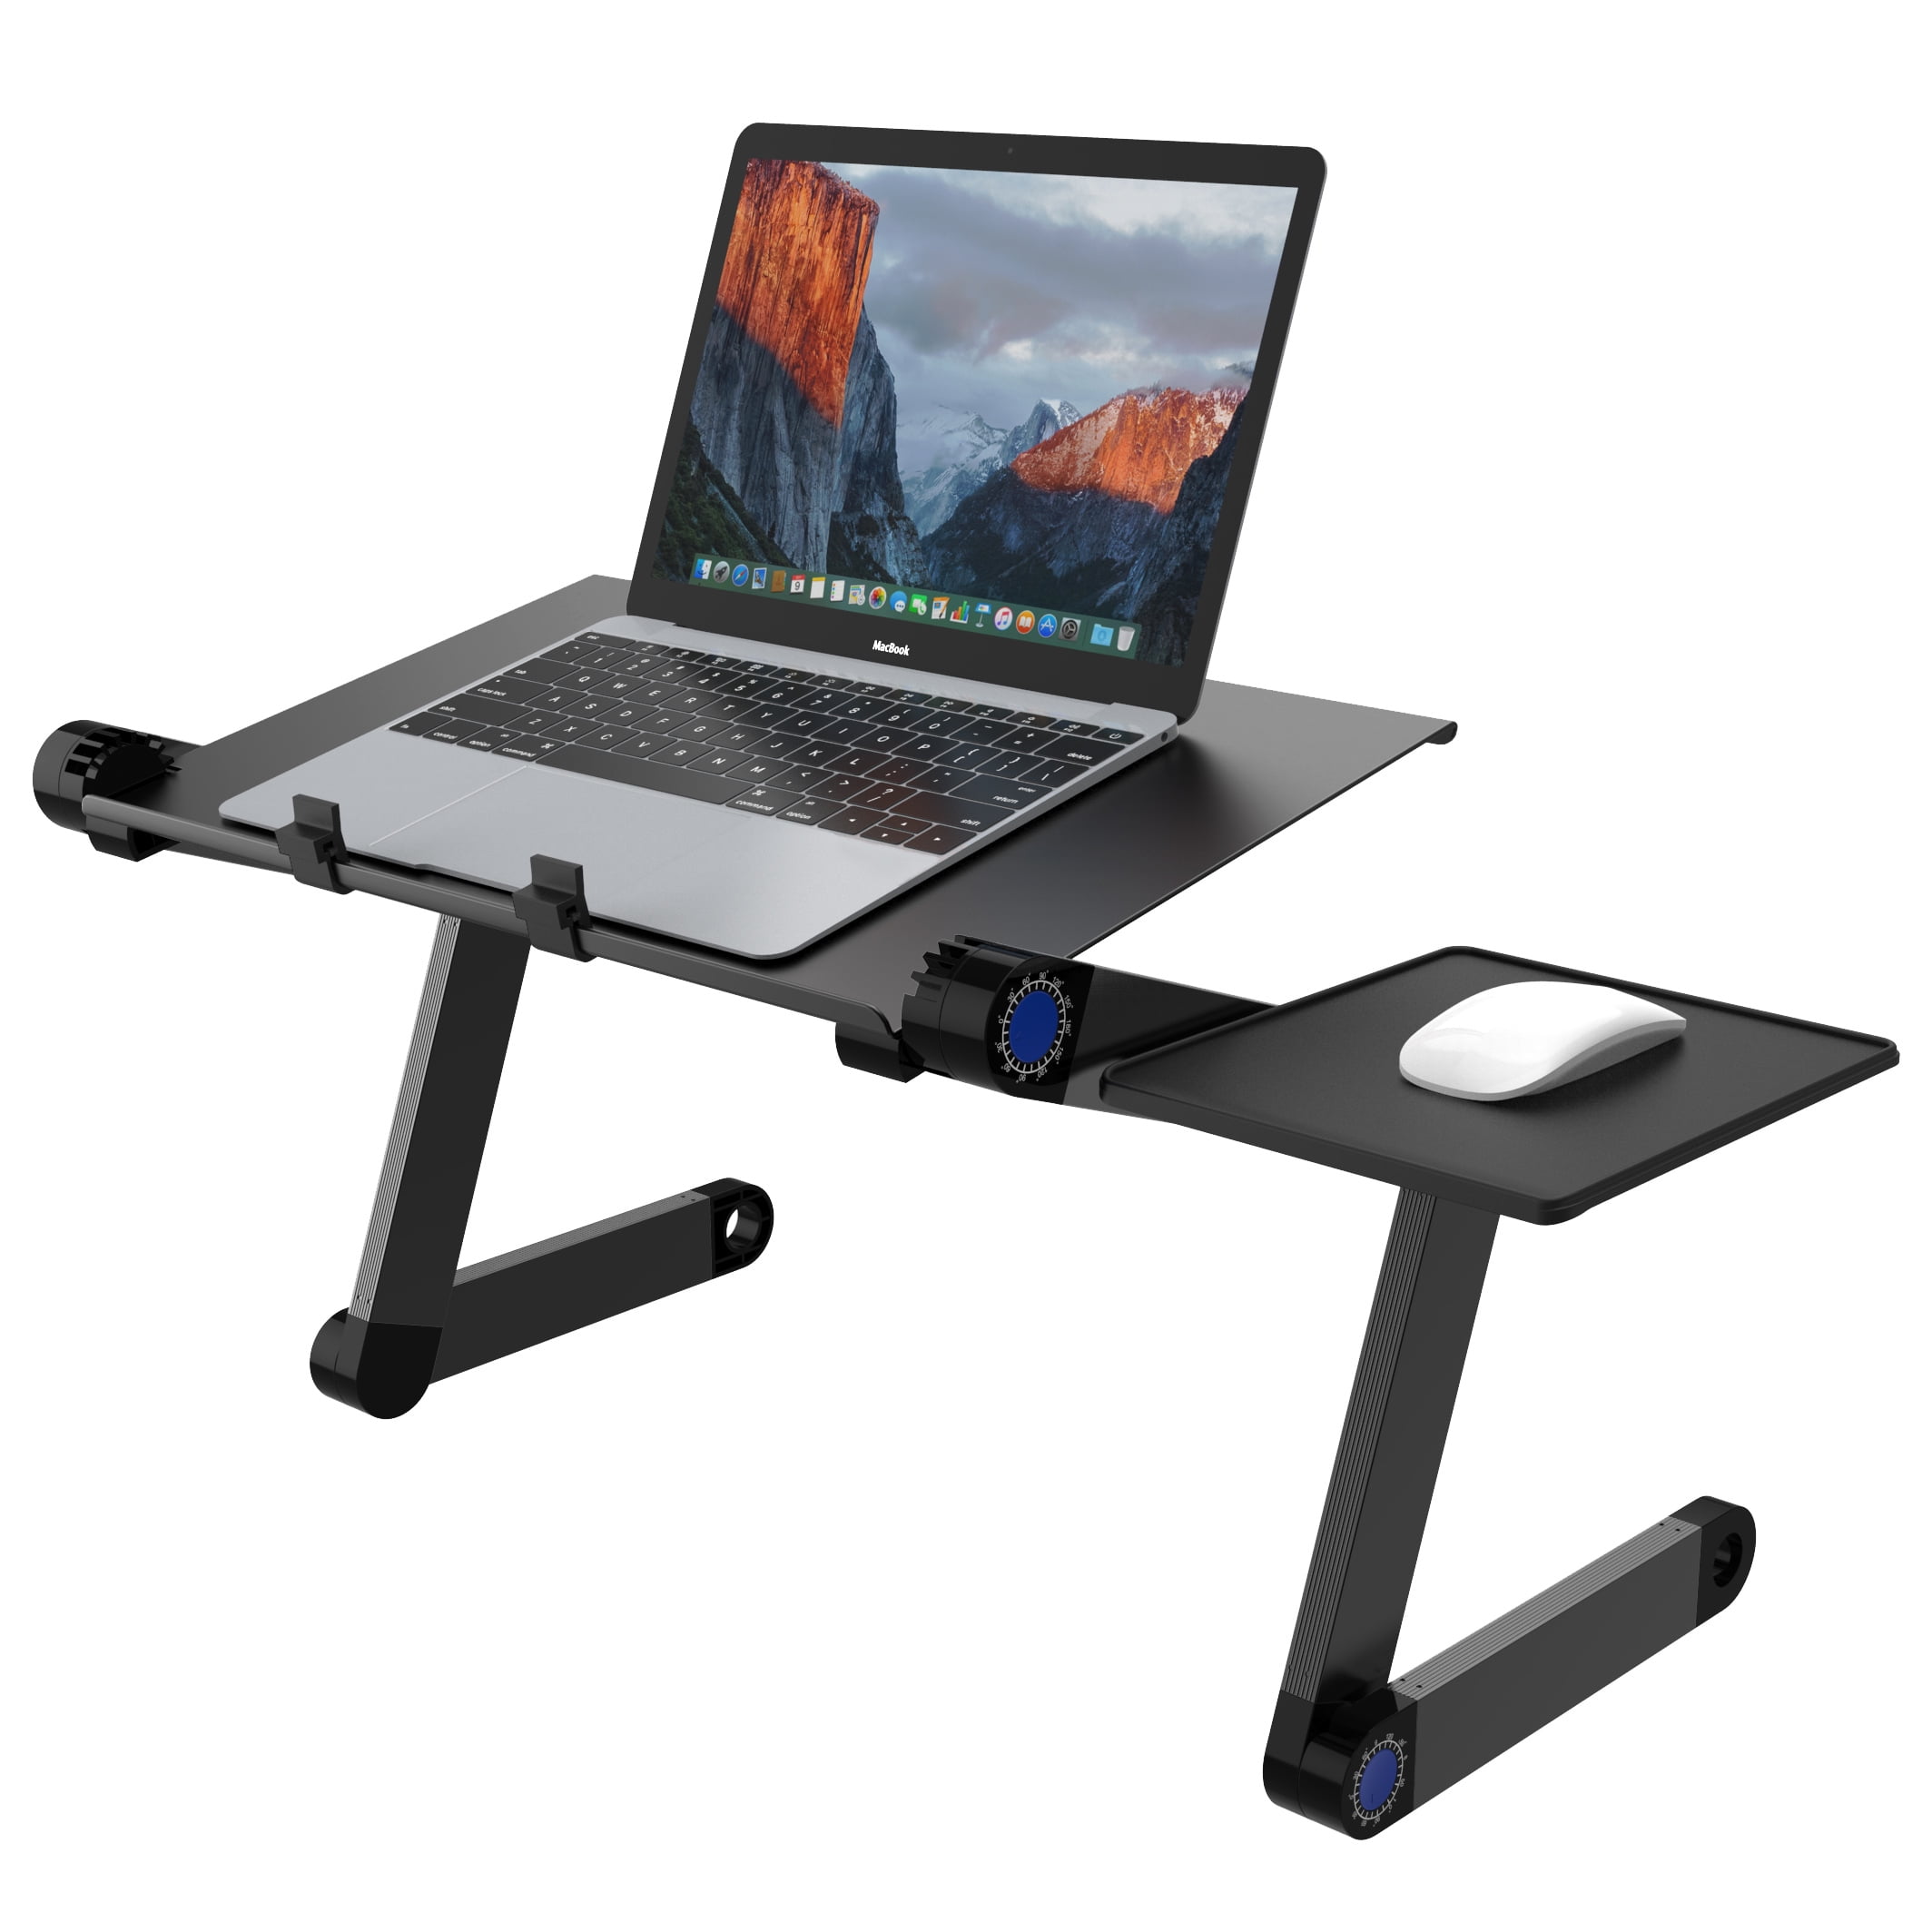 Adjustable Laptop Stand Desk Laptop Tablet Bed PC Holder Notebook W/ Mouse Tray